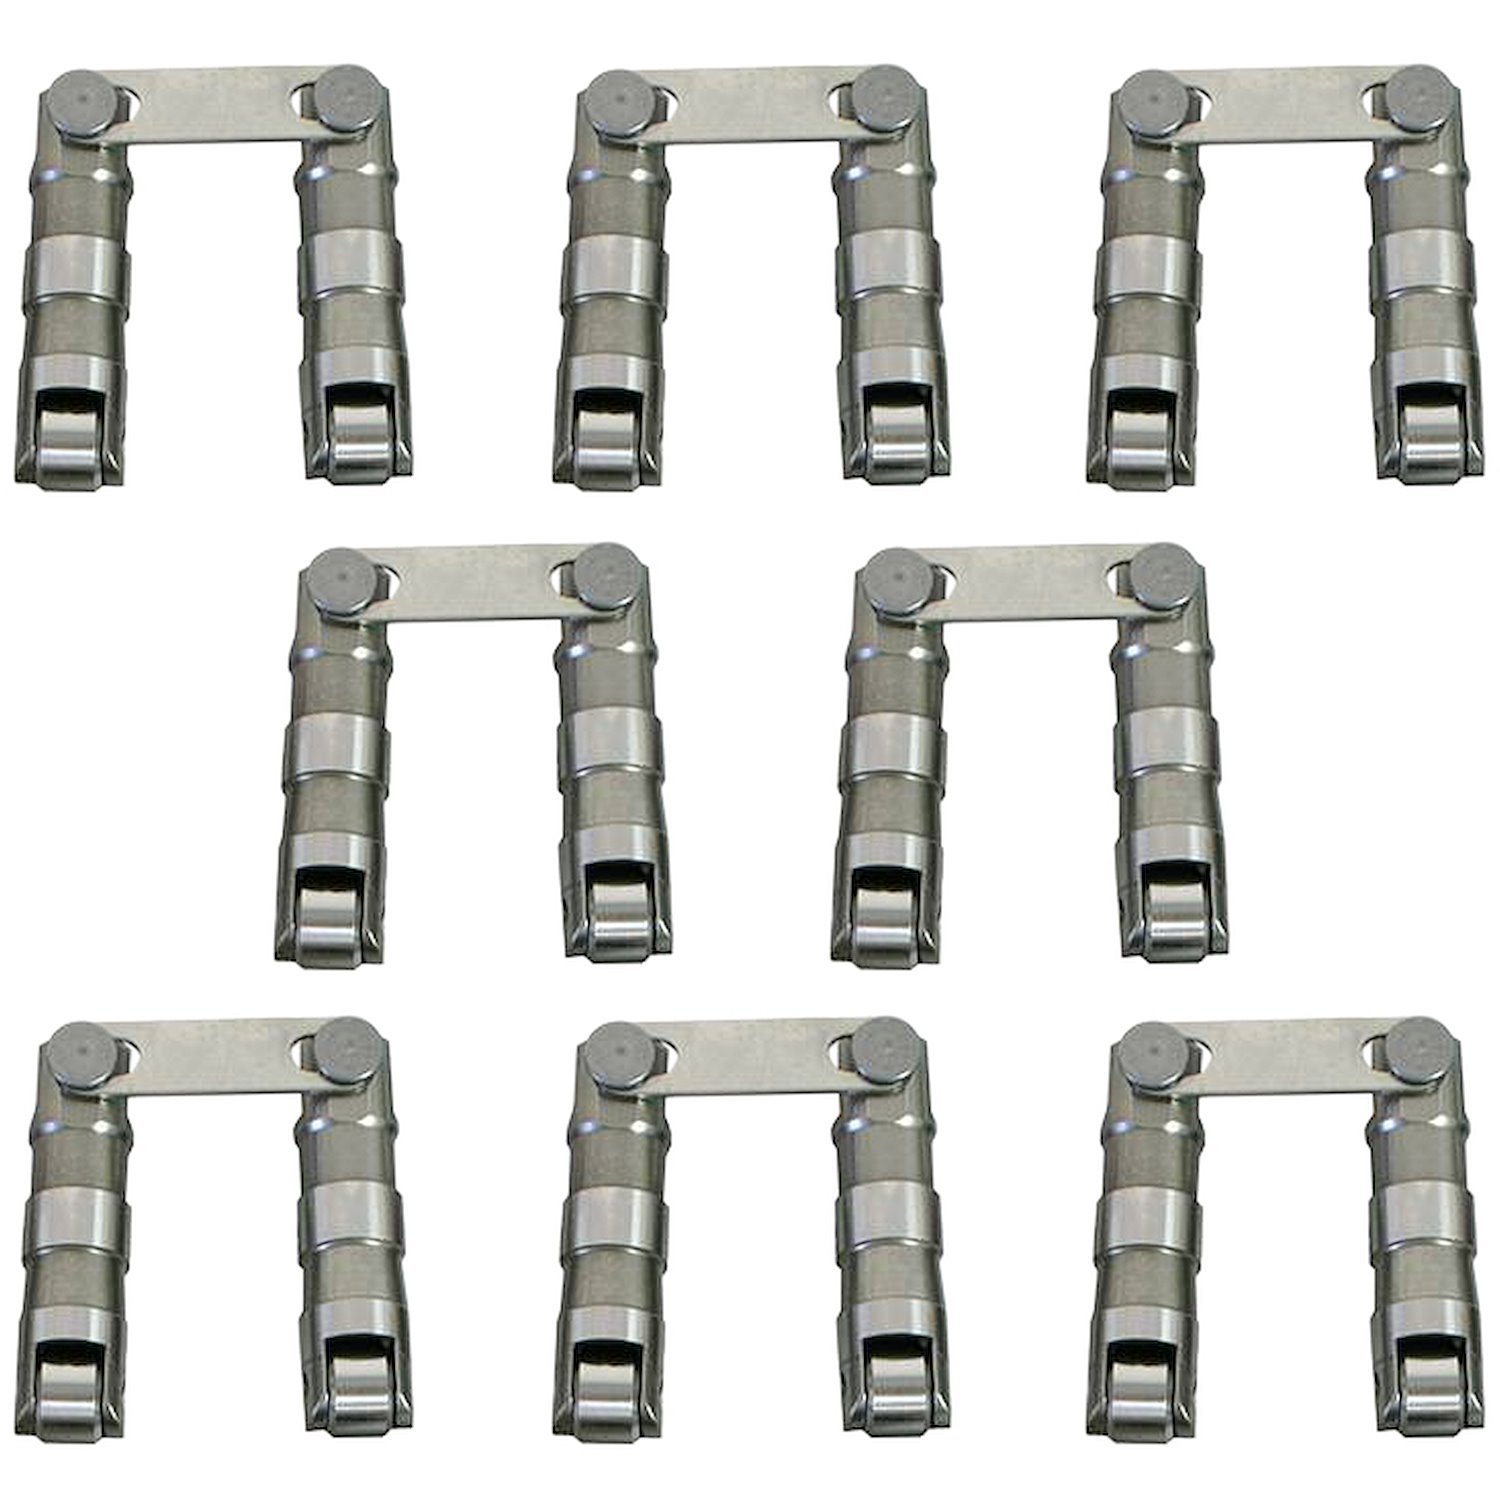 Max Effort Retro-Fit Hydraulic Roller Lifter Set Chevy